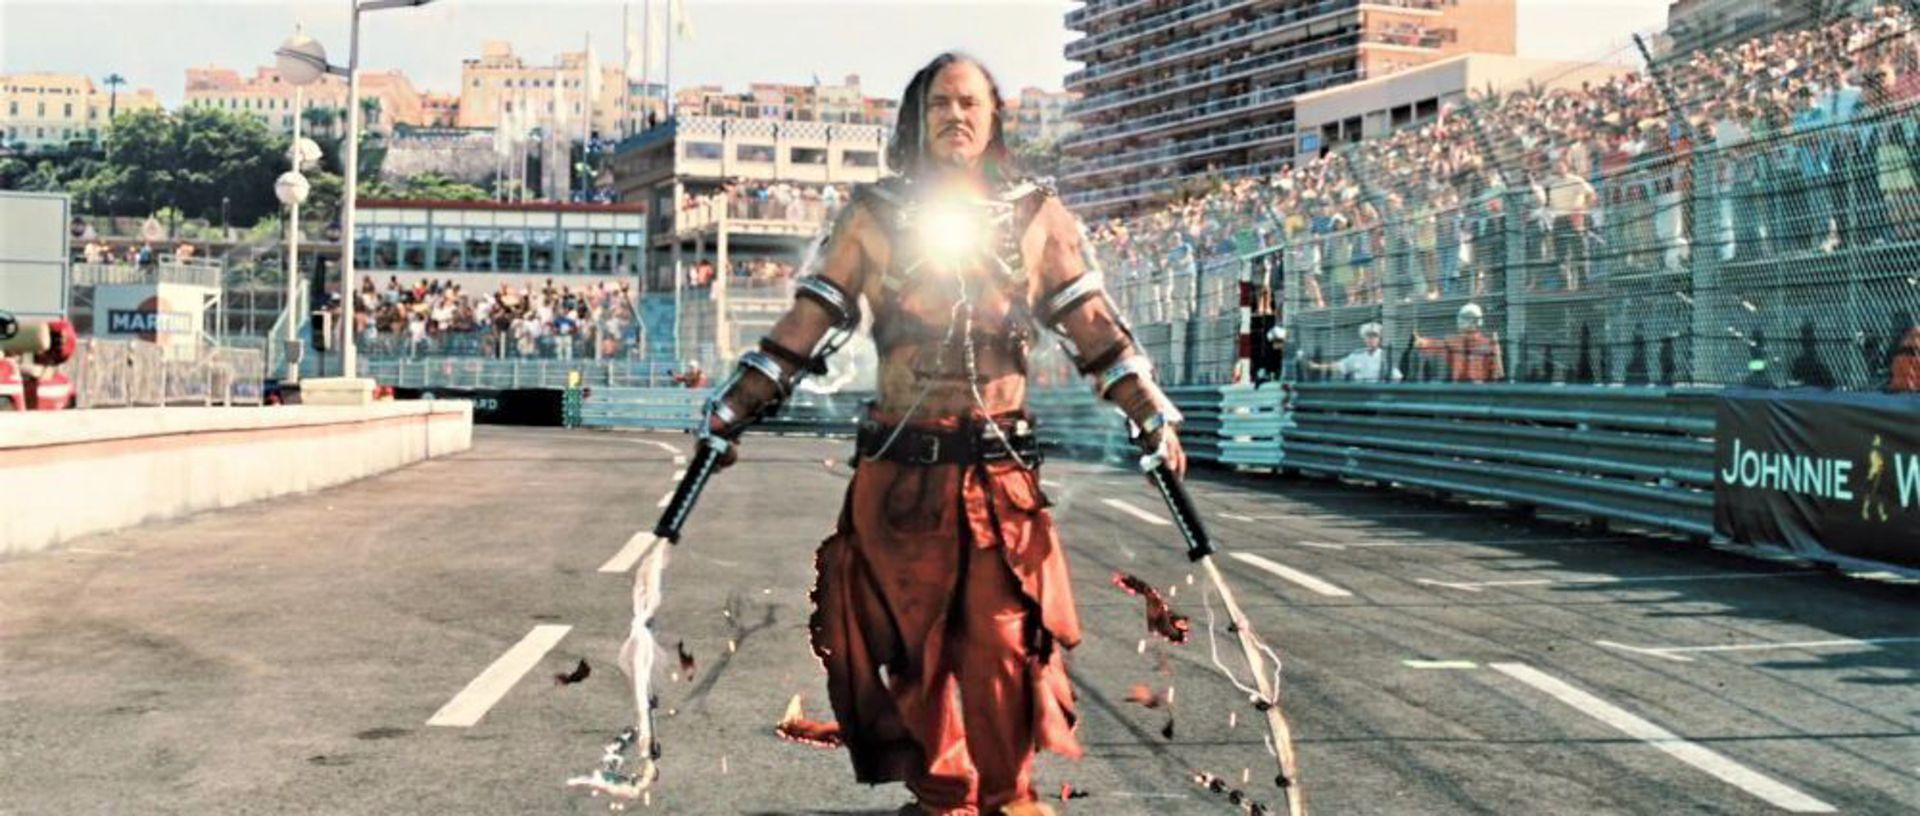 IRON MAN 2 | MICKEY ROURKE "WHIPLASH / IVAN VANKO" ELECTRIC WHIP ARM BRACE PROPS (WITH DVD) - Image 10 of 11